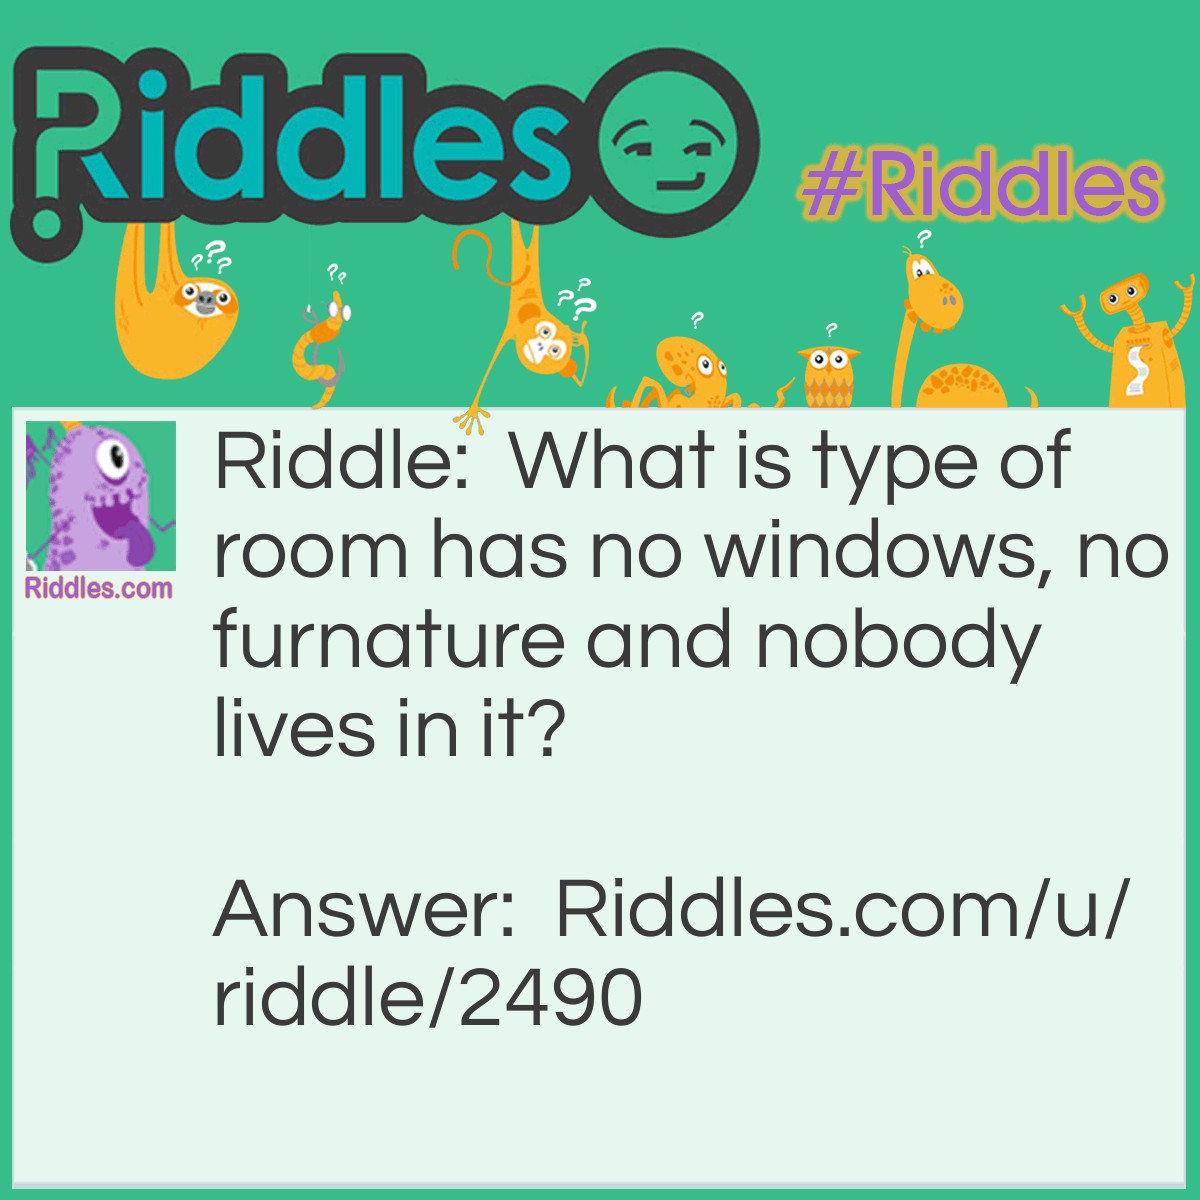 Riddle: What is type of room has no windows, no furniture and nobody lives in it? Answer: A mushroom.